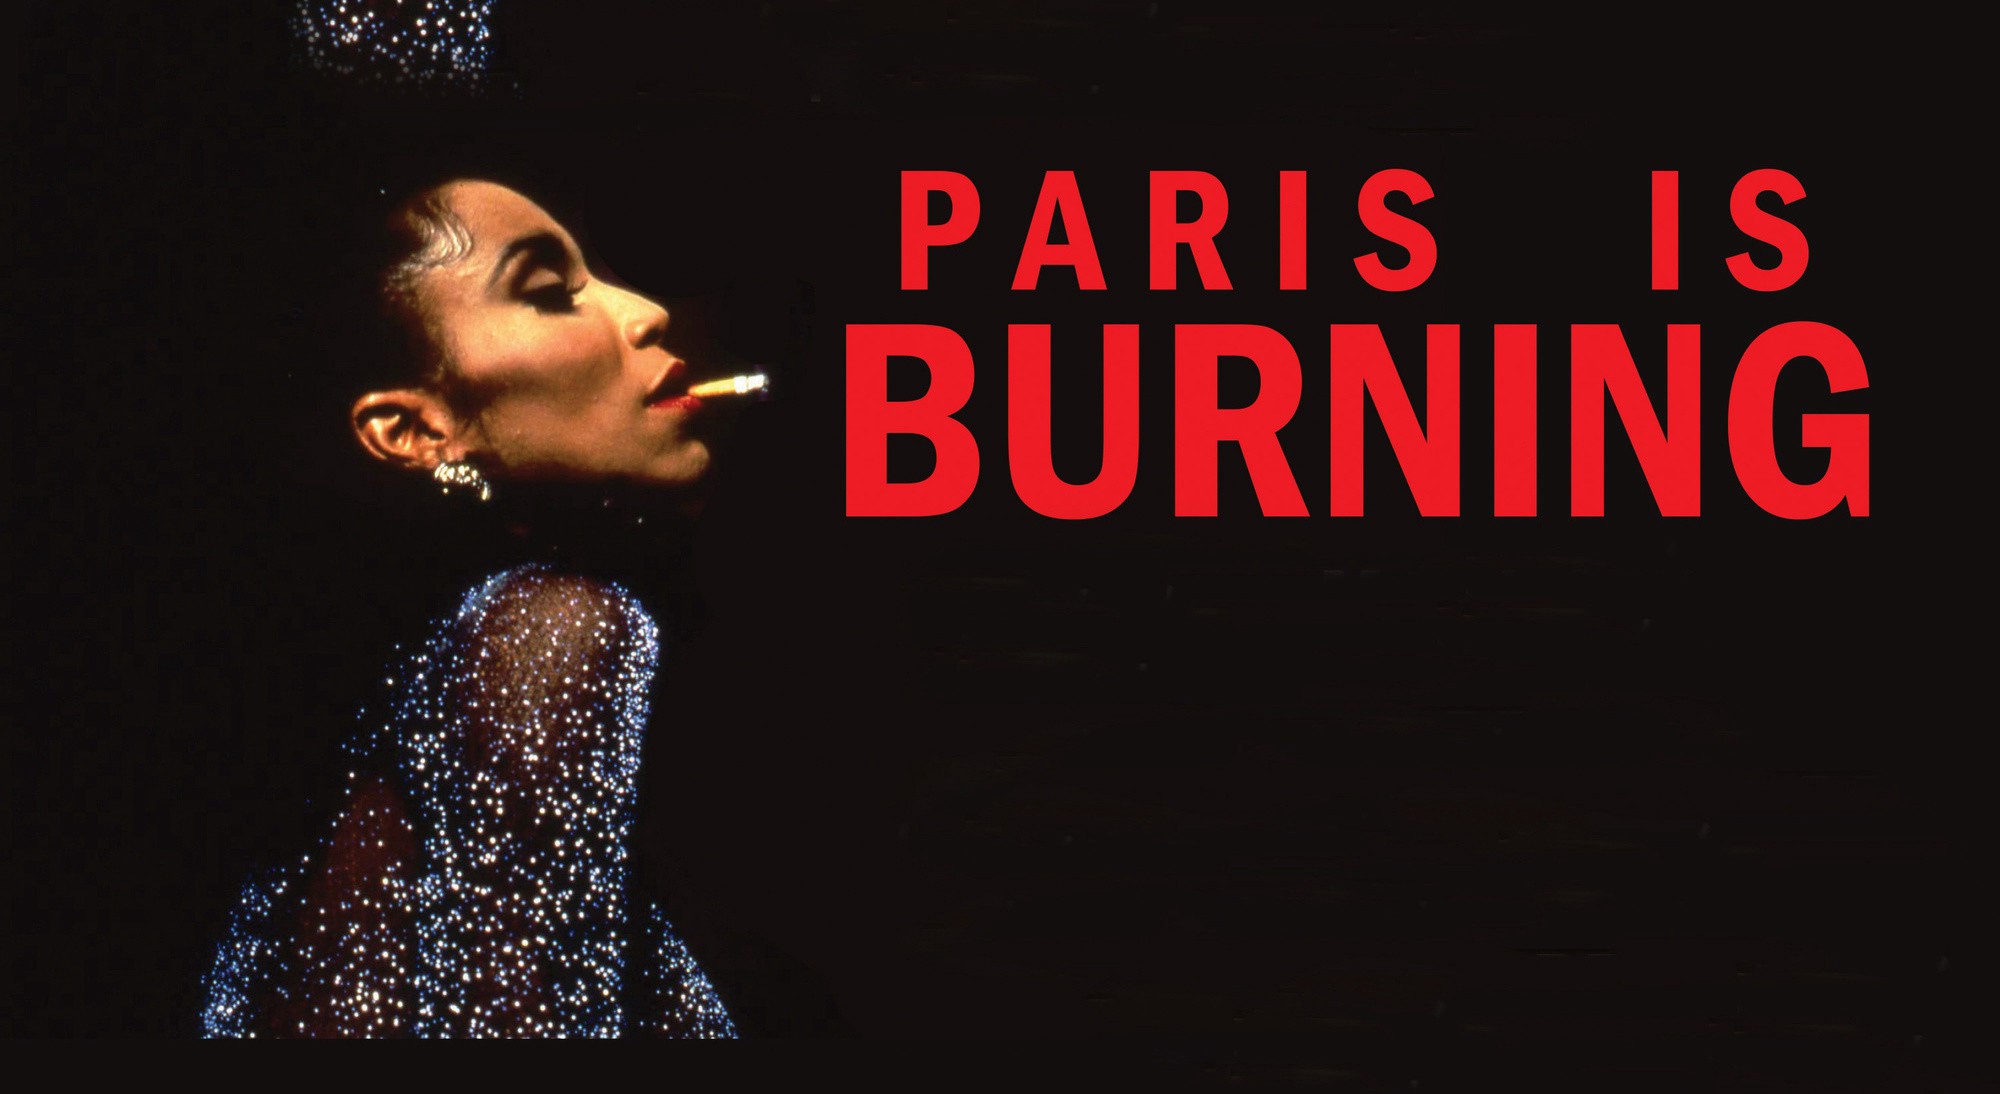 Octavia St. Laurent, ballroom performer and activist, poses against a black background. She smokes a cigarette and wears a shimmering blue gown. To her right, red text reads "PARIS IS BURNING"